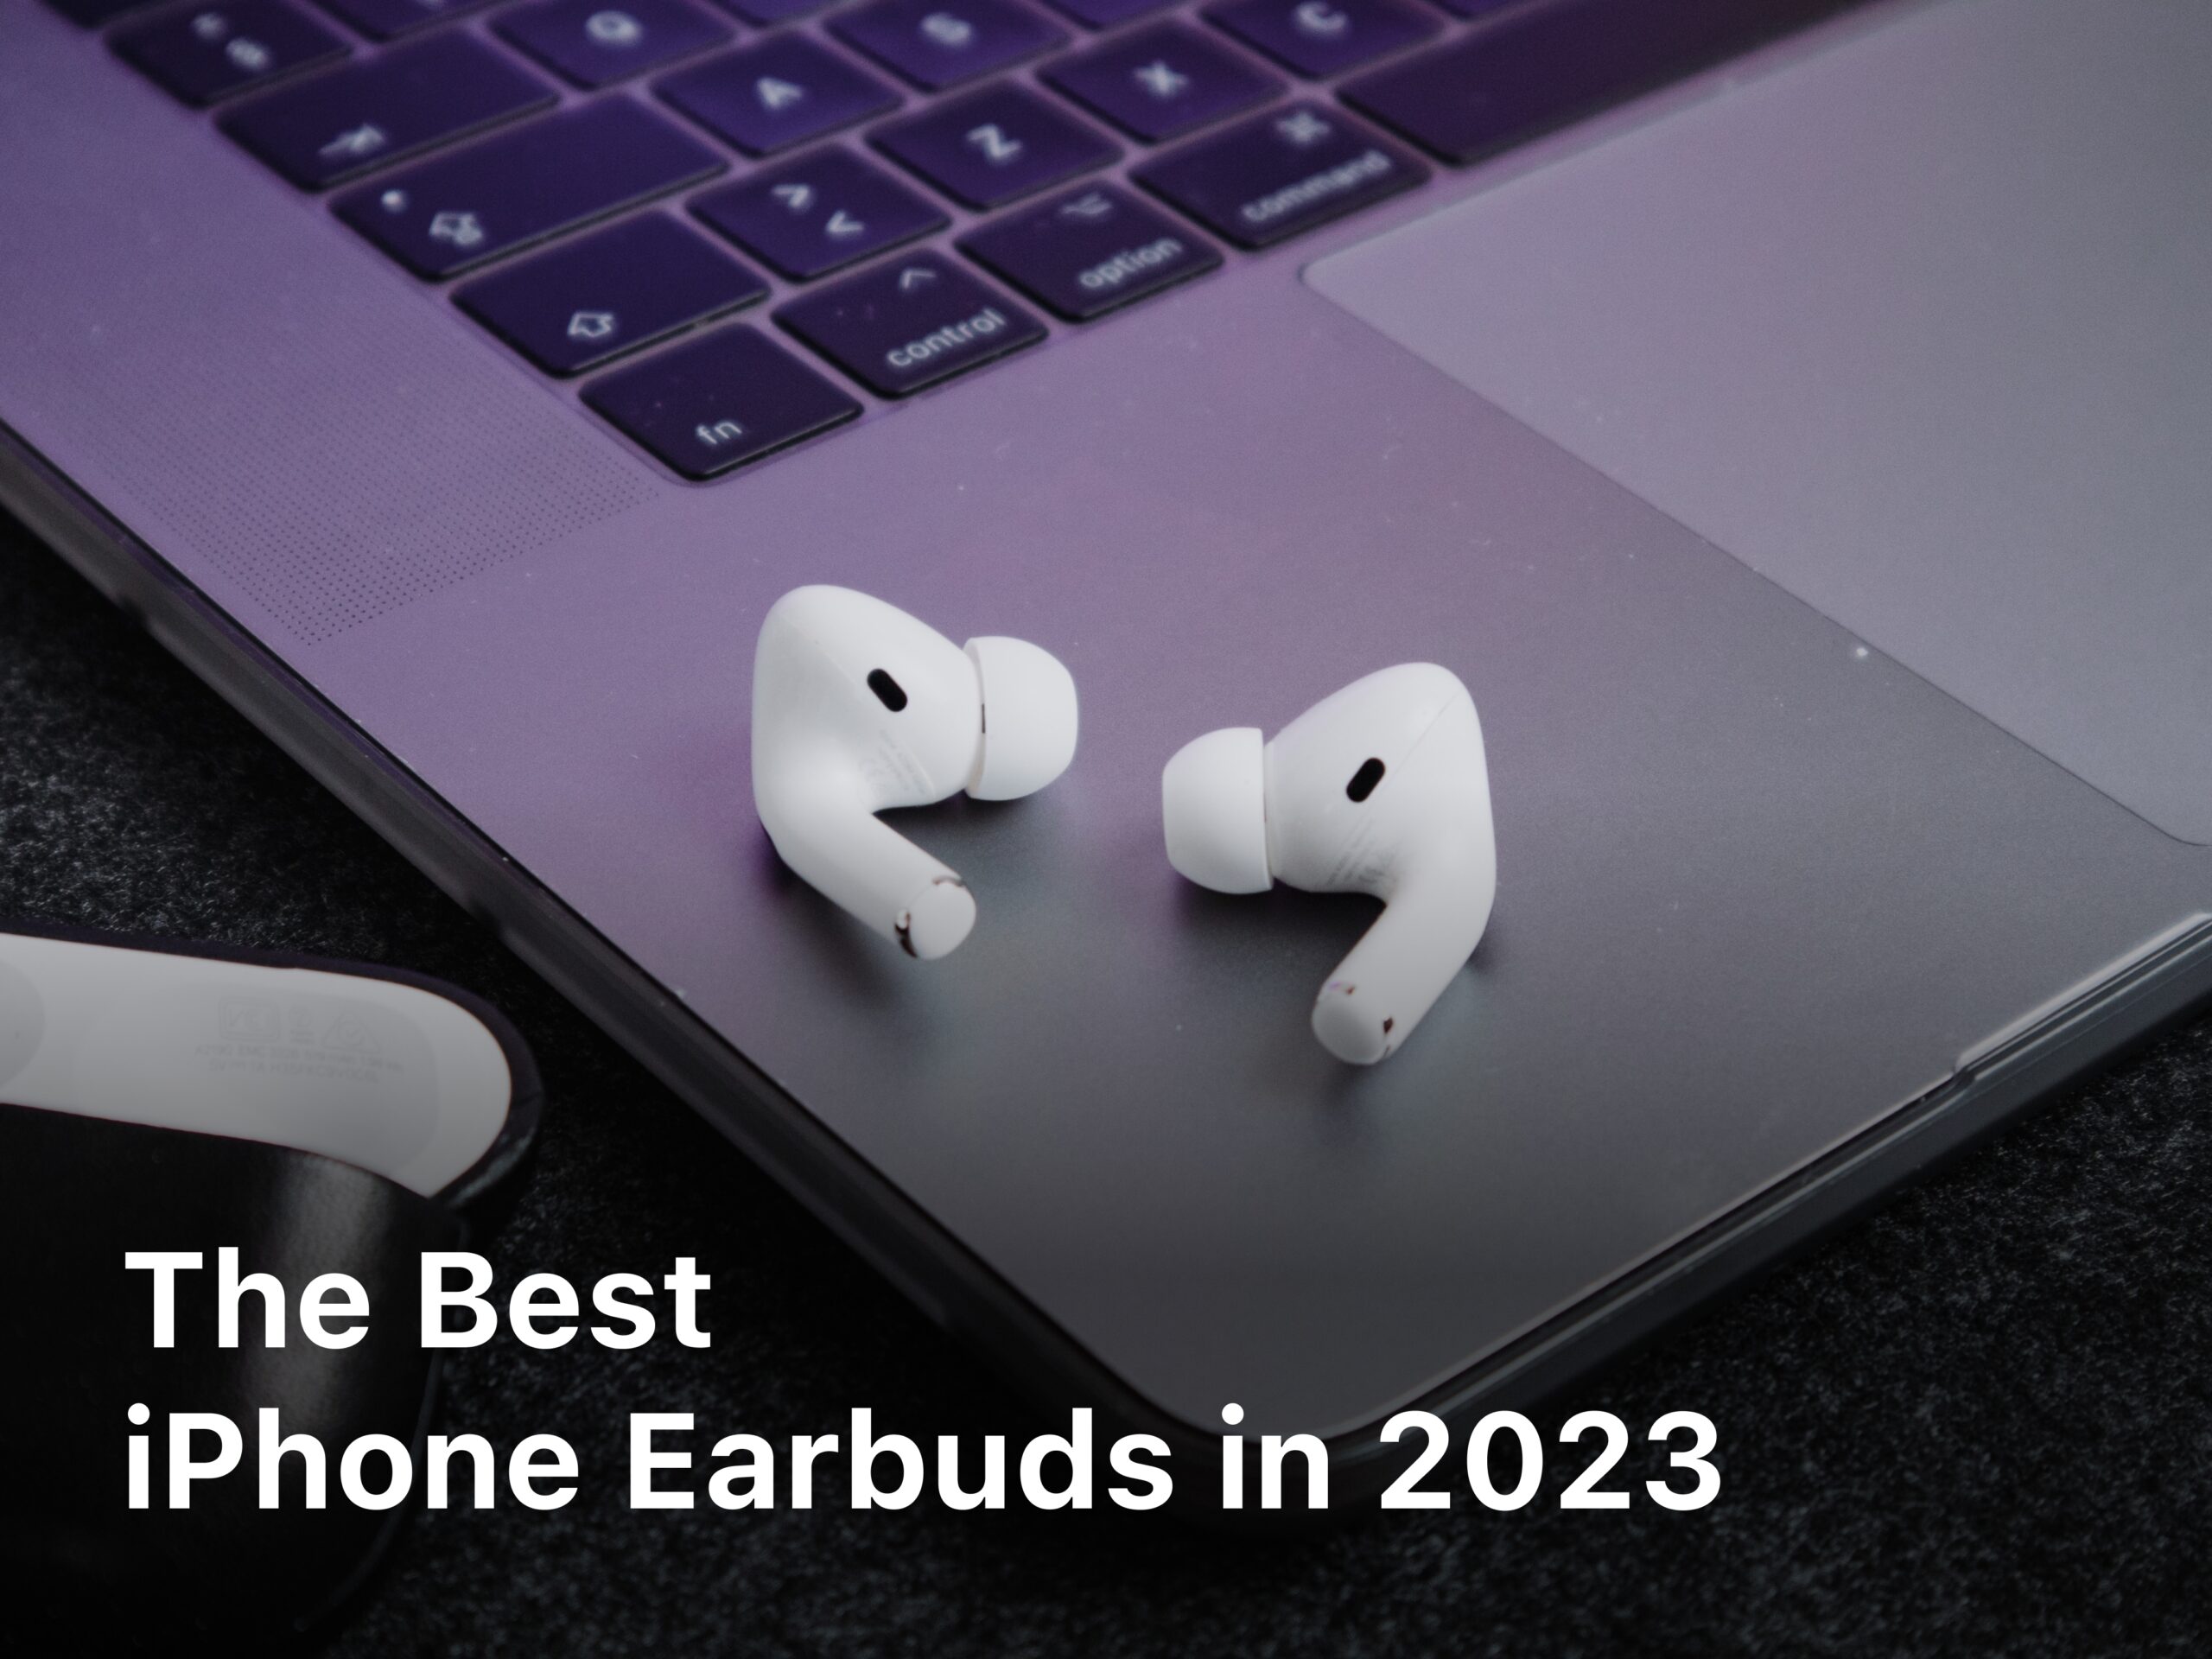 The Best iPhone Earbuds